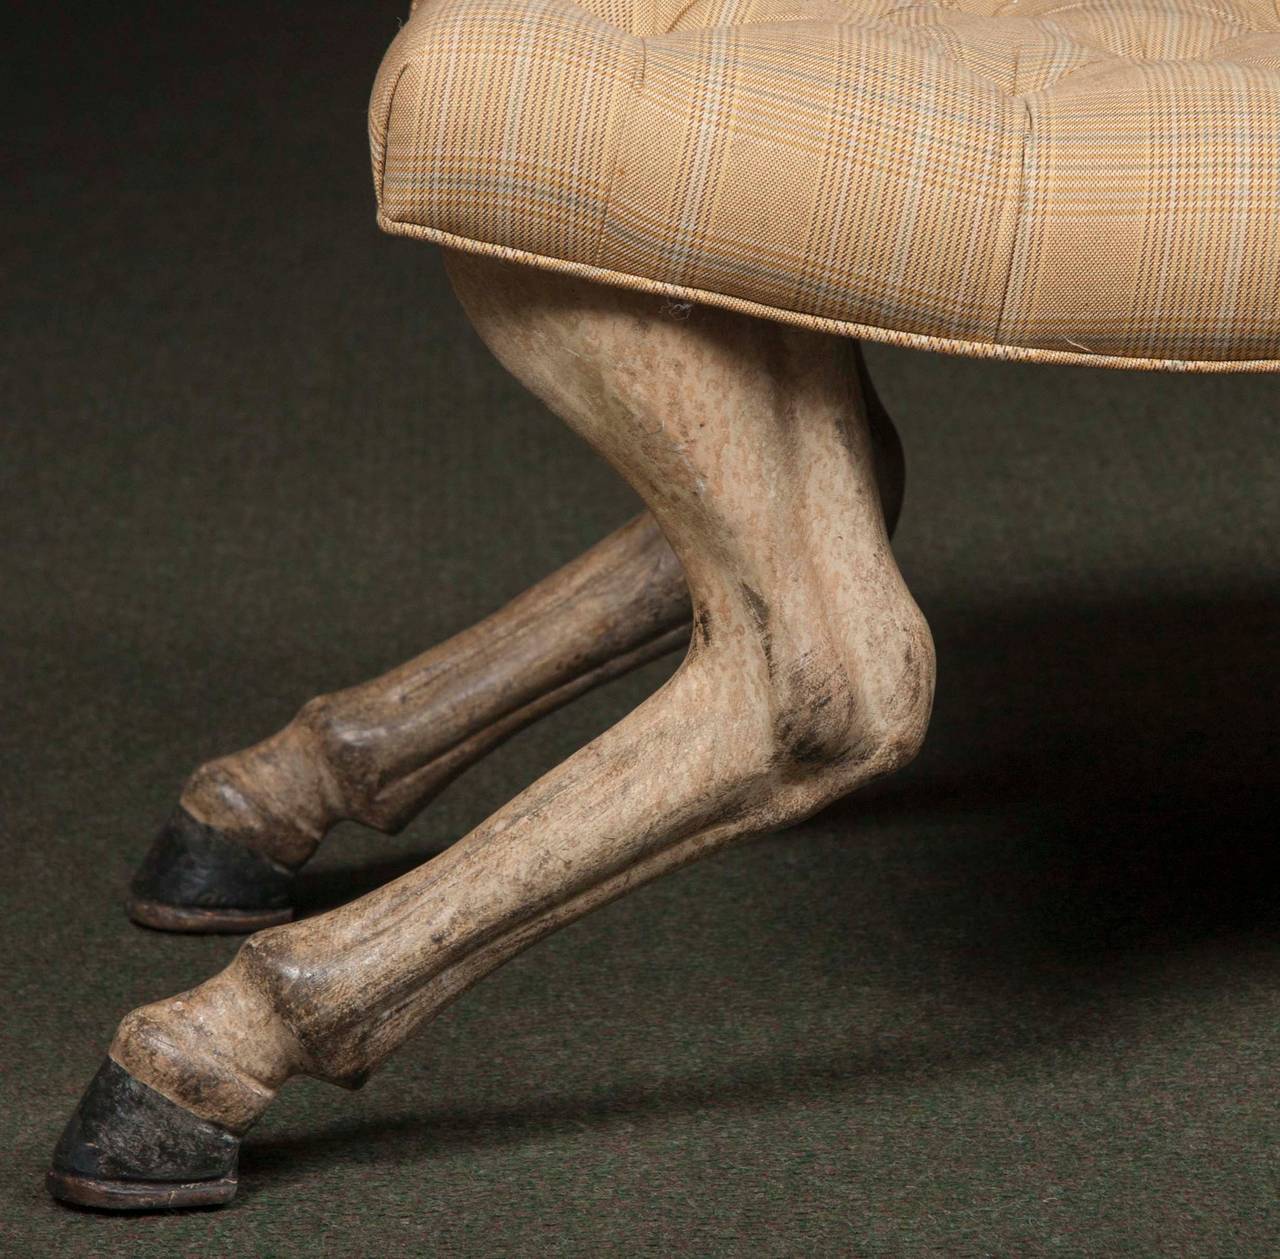 A John Rosselli upholstered tufted stool with carved and painted wooden legs in the form of animal legs with hoof feet.